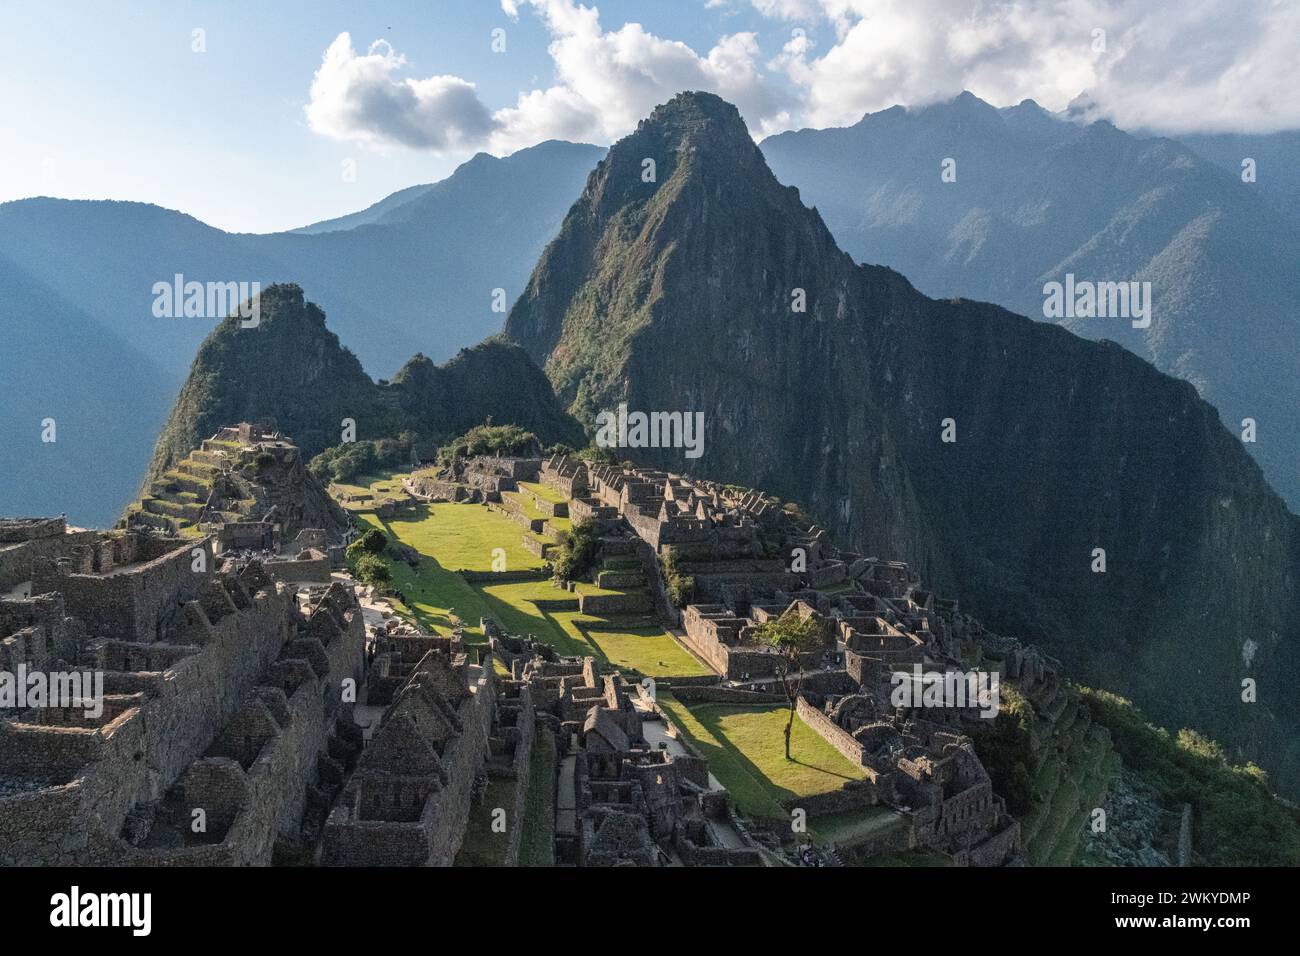 A view of Machu Picchu citadel lost city ruins and Huayna Picchu in Per Stock Photo